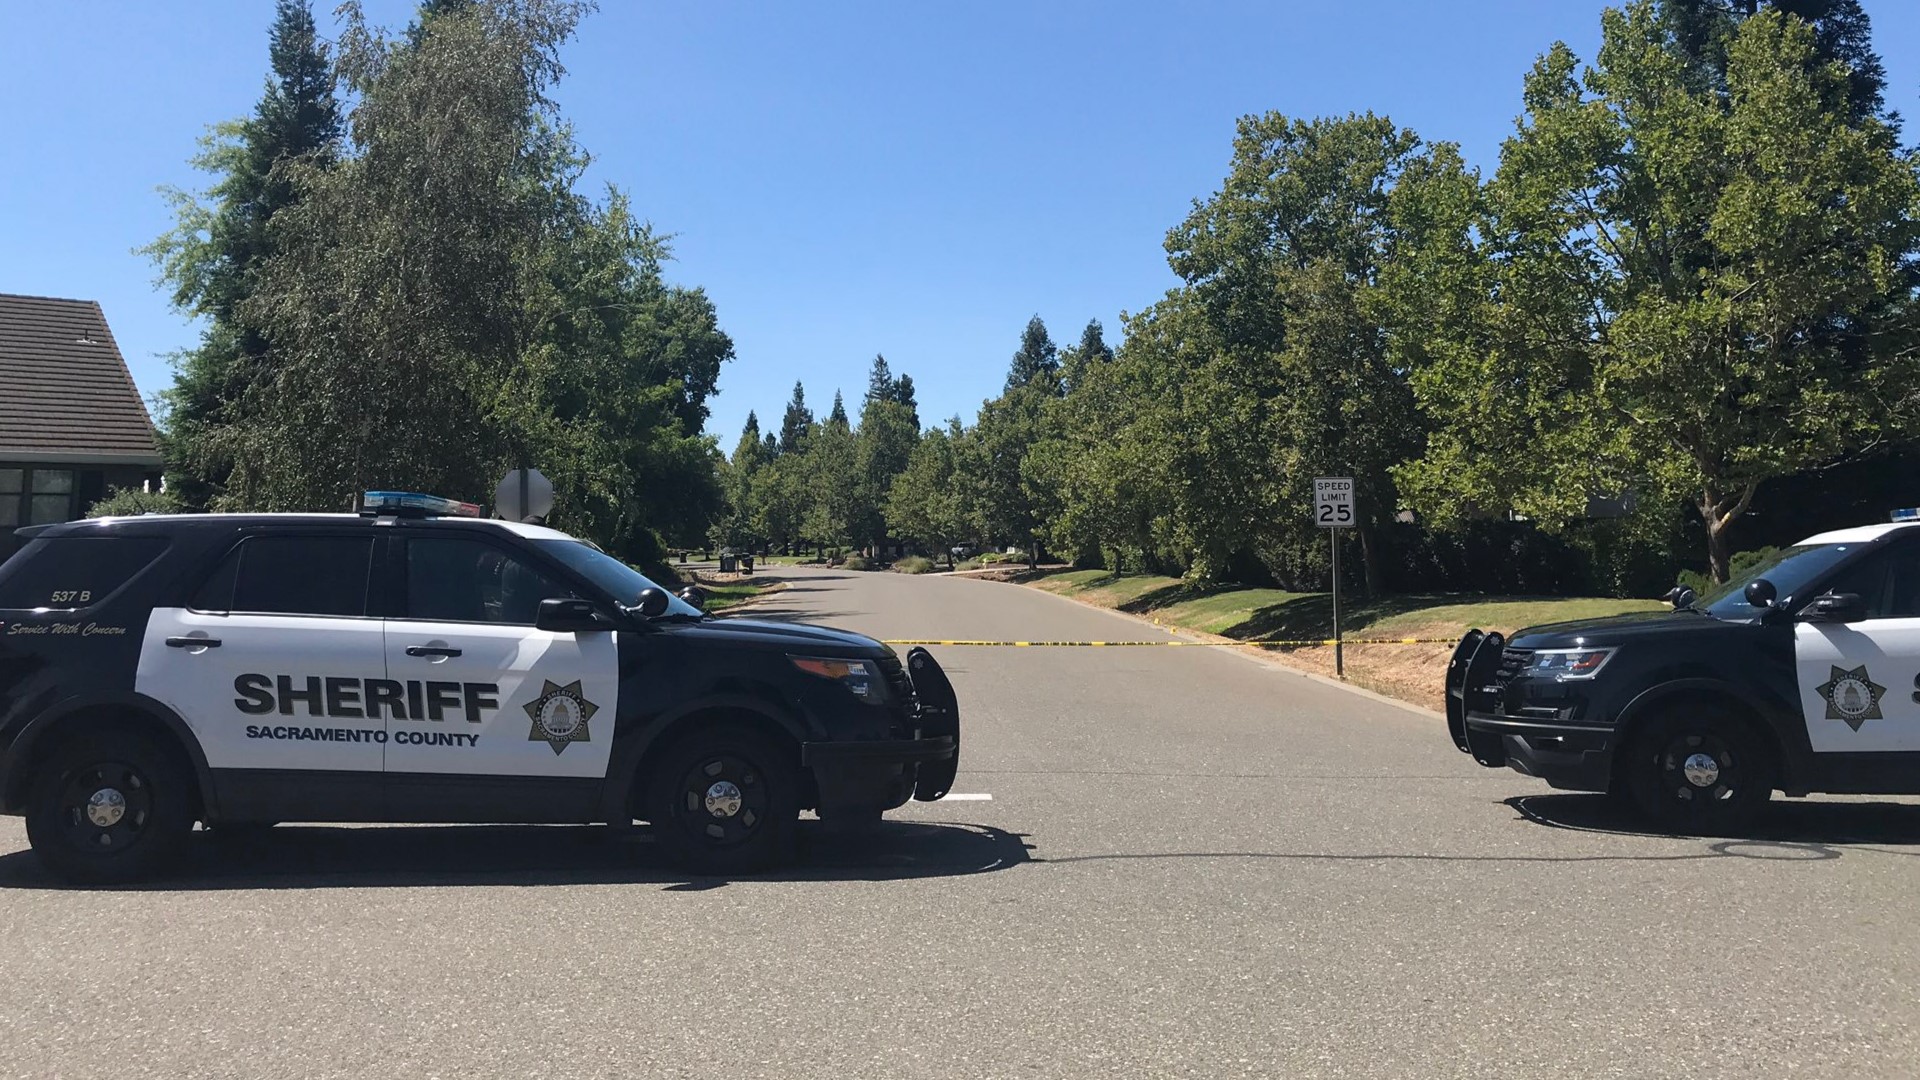 Neighbors in the quiet area of well-manicured homes say it's unusual to see a crime scene as authorities investigate the fatal shooting of an 18-year-old driver.